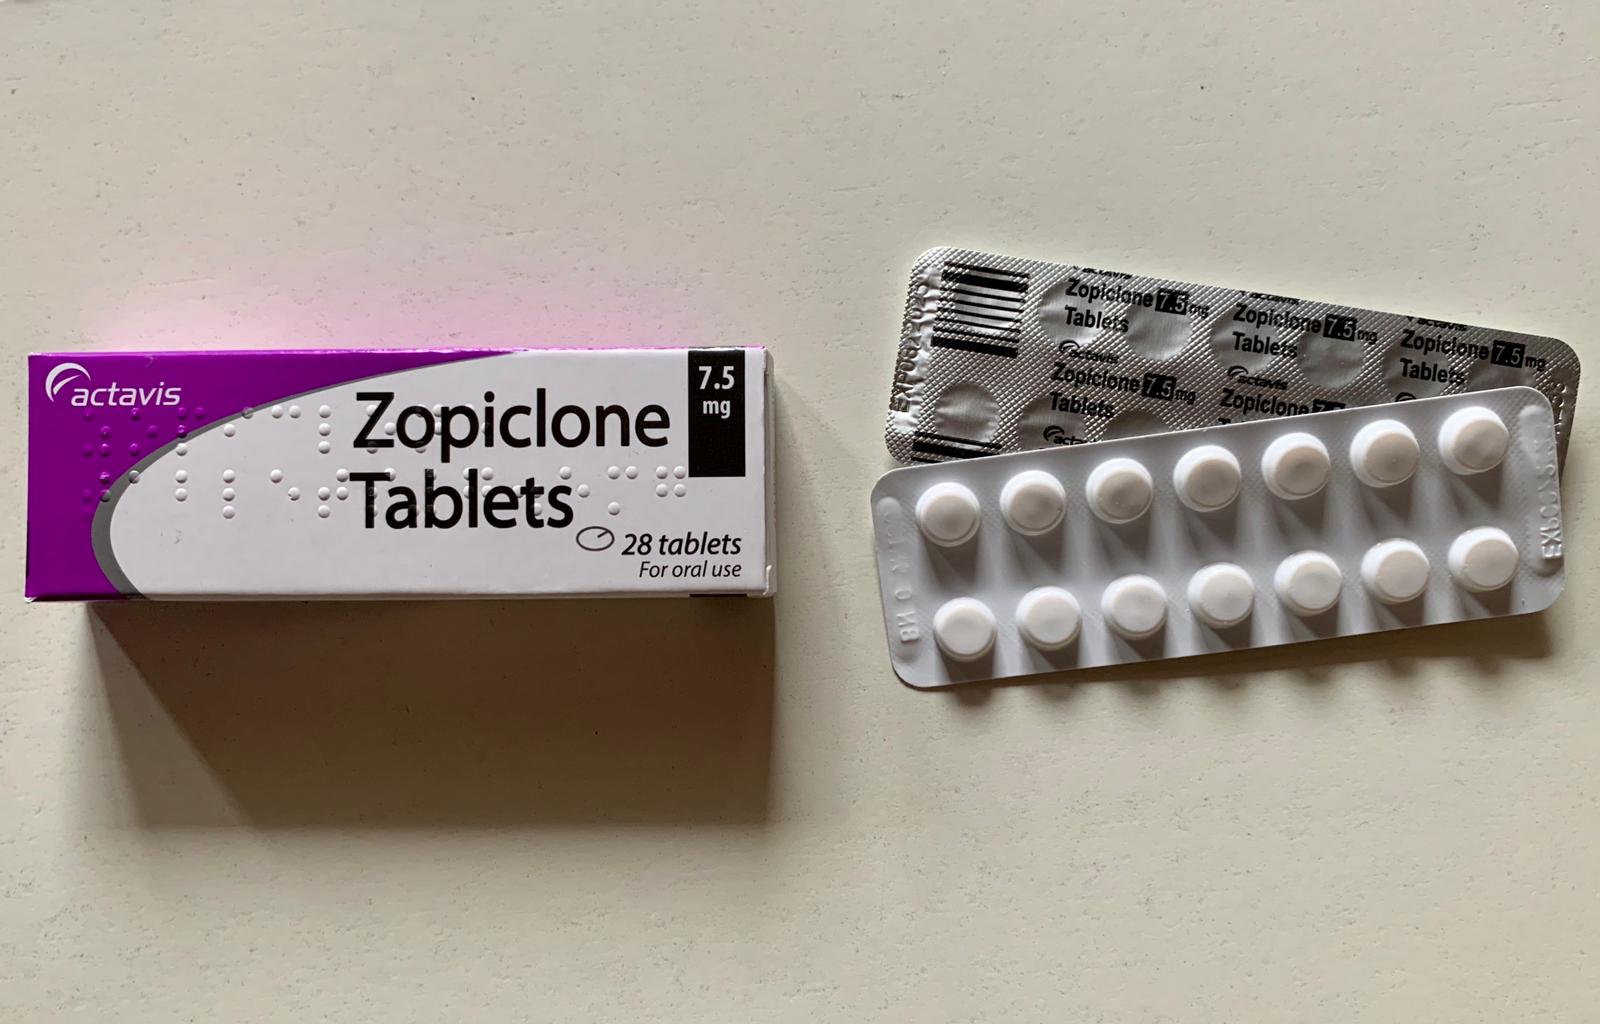 Buy Zopiclone Next Day Delivery - Get a Good Night's Sleep Fast!